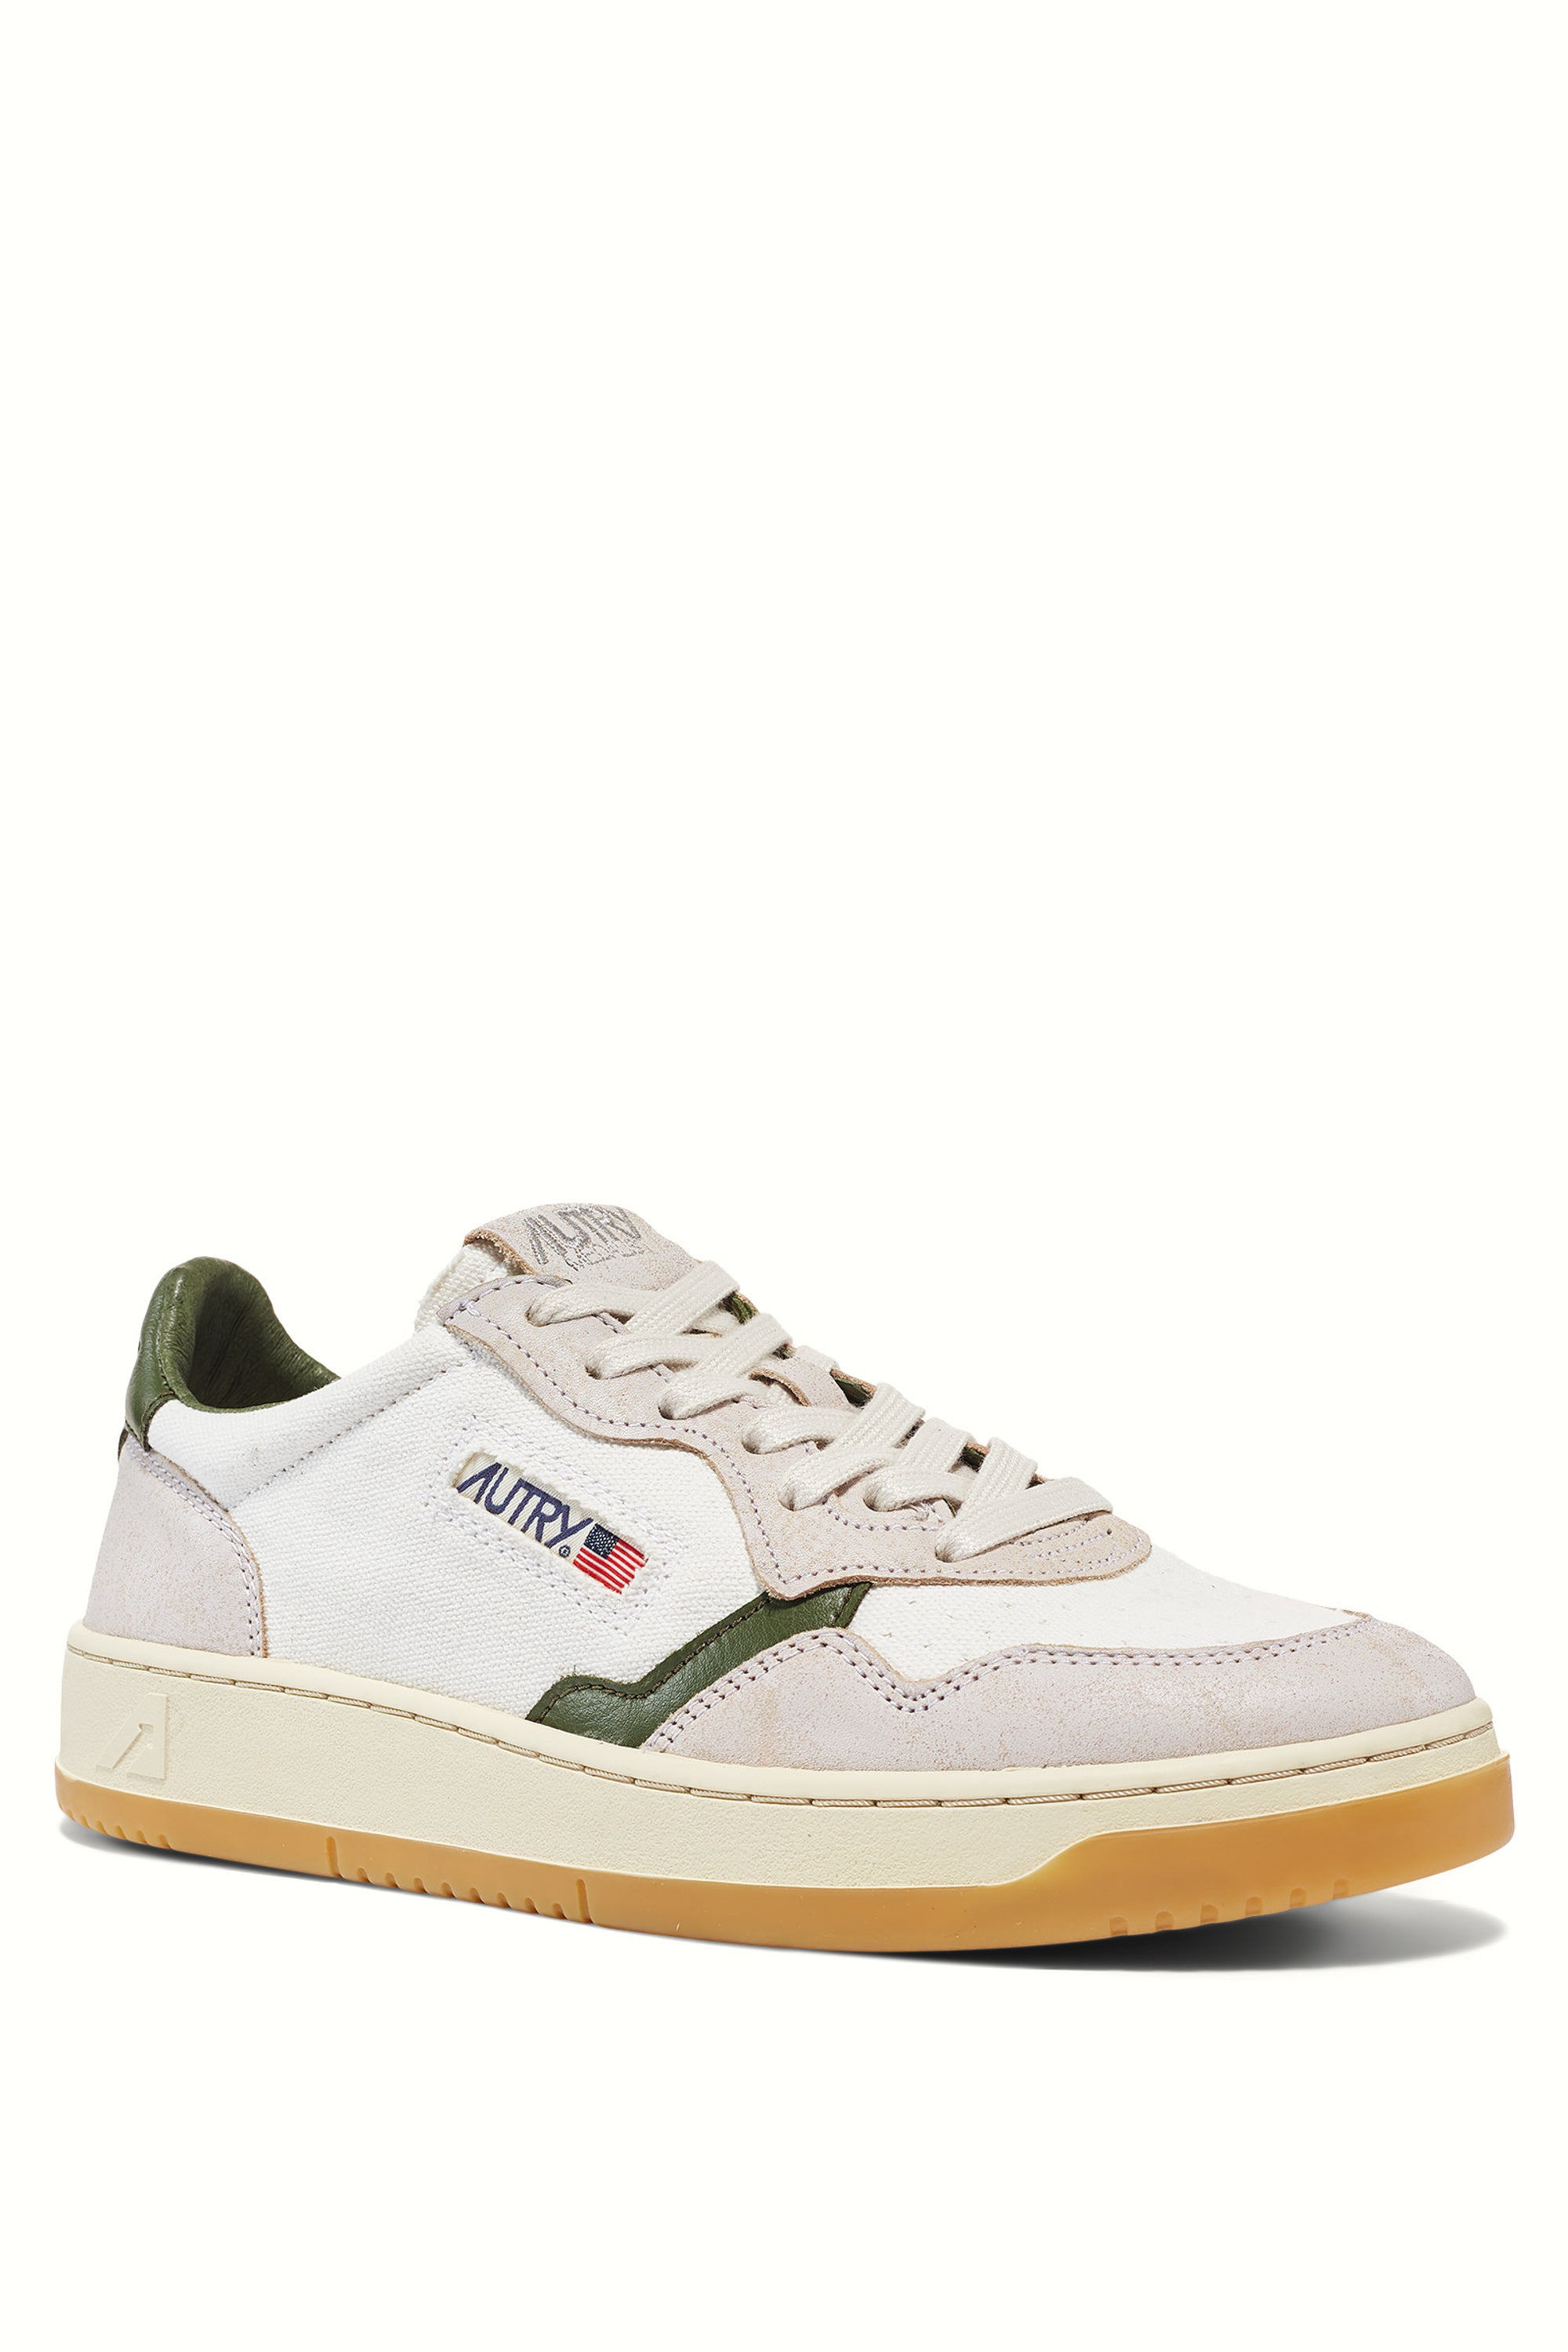 Medalist bi-material sneaker in canvas and leather